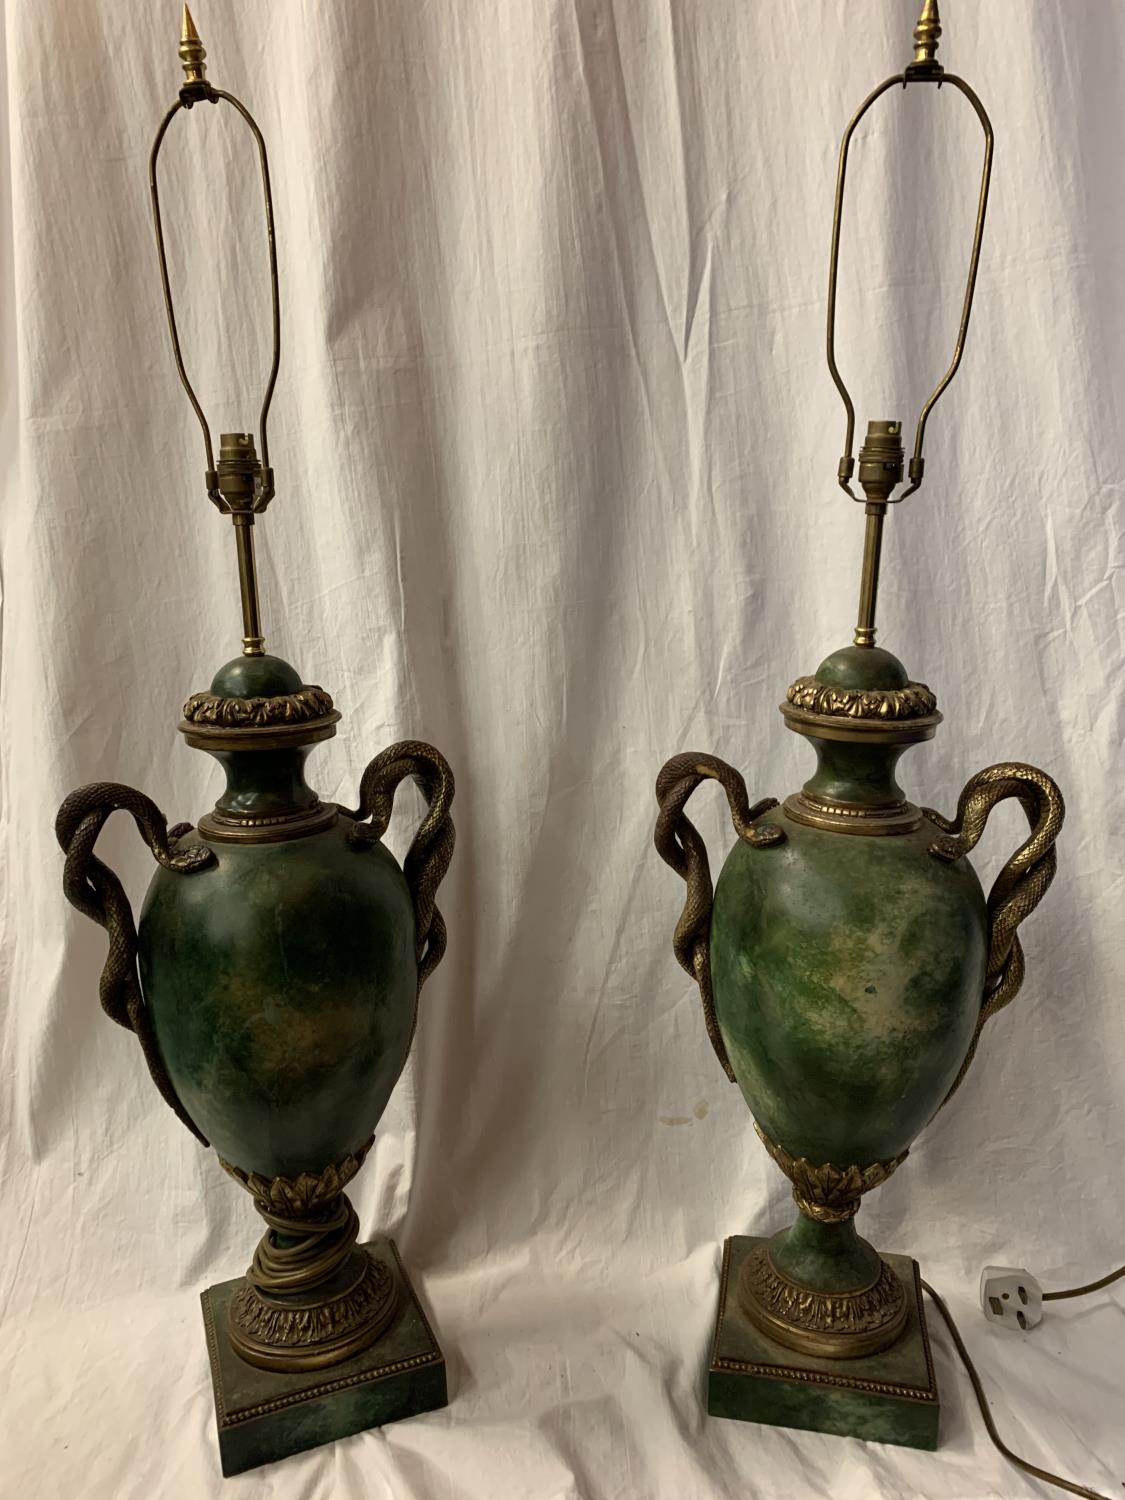 A PAIR OF LARGE GREEN URN SHAPED TABLE LAMPS WITH TWIN HANDLES IN THE FORM OF INTERTWINED SNAKES H: